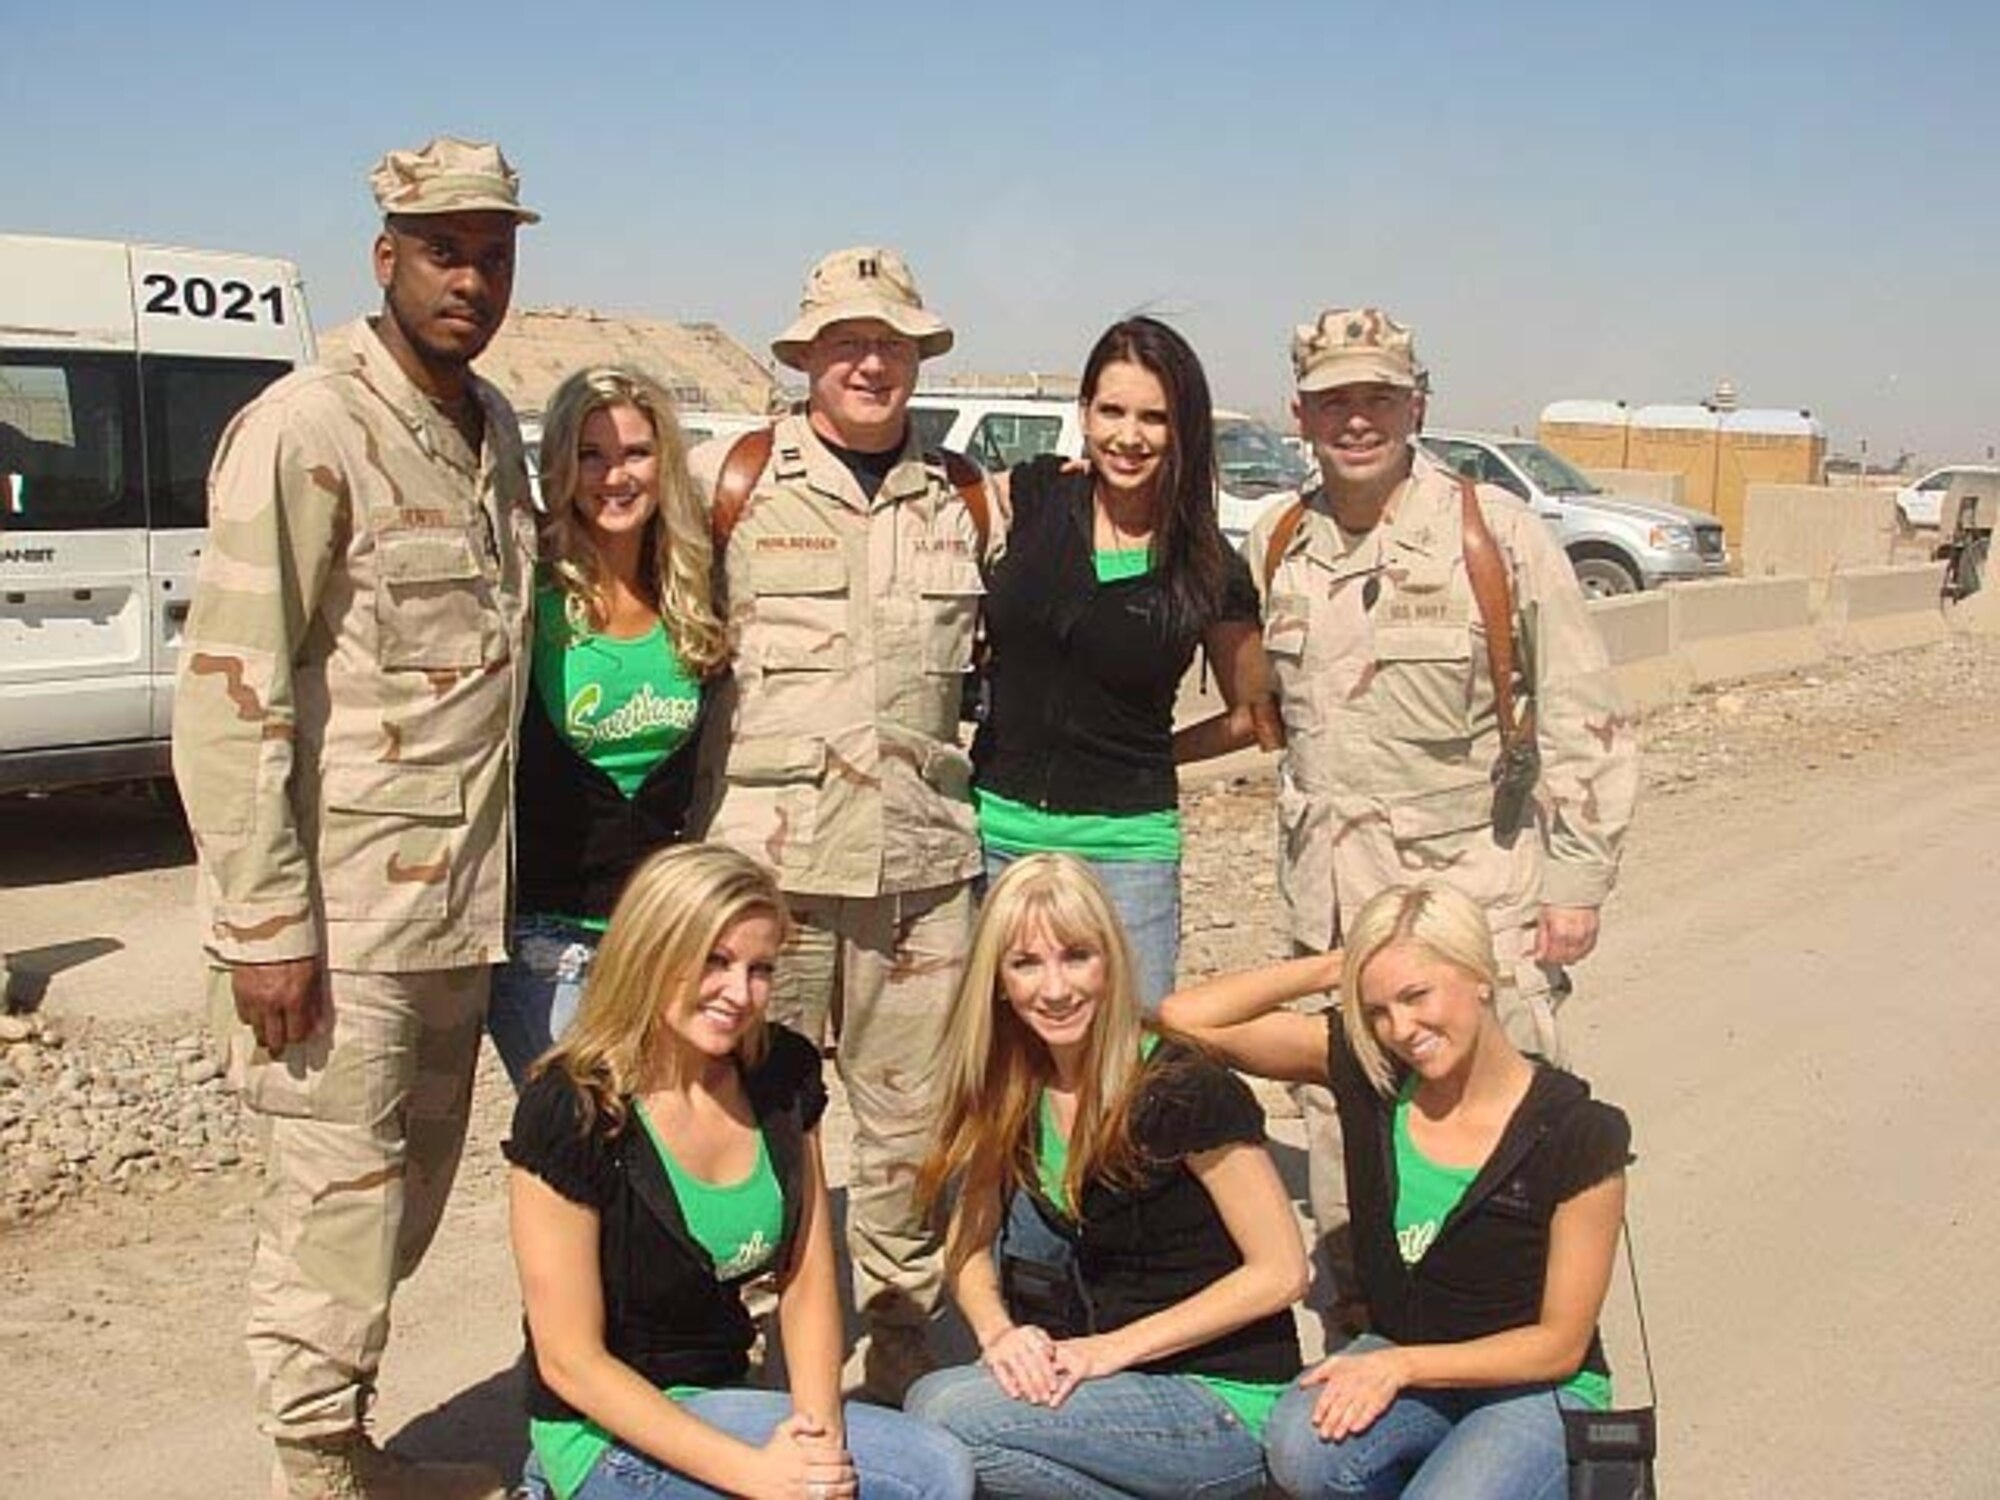 BALAD, Iraq -- (Top row, second from right) Former Senior Airman Jessica Andrews, 459th Aeromedical Staging Squadron, joins deployed troops and fellow "Sweetheart for Soldiers" members here during a 10-day visit to Iraq and Kuwait last fall. Sweethearts for Soldiers is a group of former NFL cheerleaders with a special connection to the military. The group puts together a military themed calendar each year to send to the troops with care packages. (Courtesy photo)